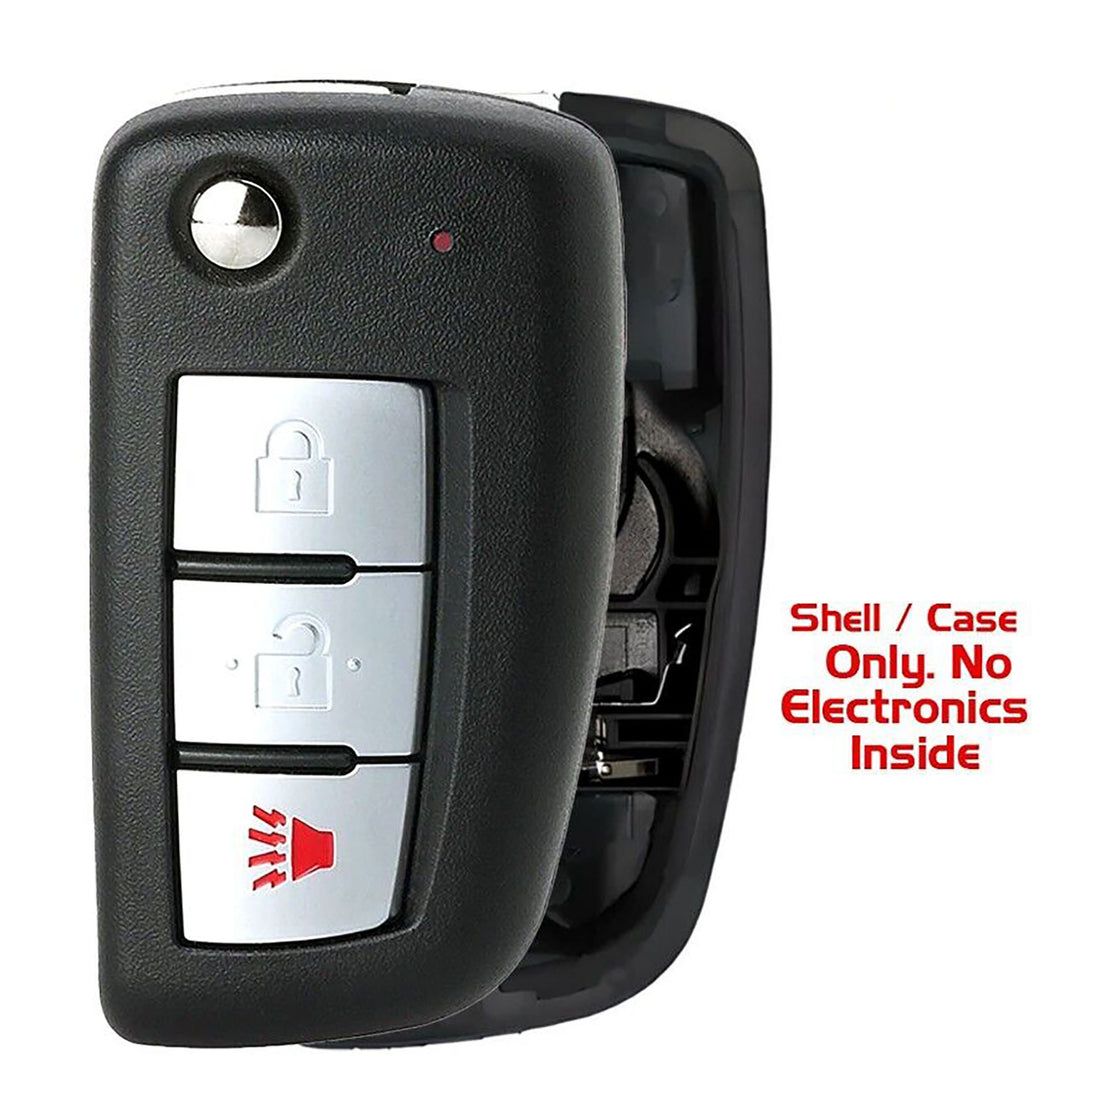 1x New Replacement Key Fob Remote SHELL / CASE Compatible with & Fit For 2014-2020 Nissan Rogue - MPN CWTWB1G767-04 (NO electronics or Chip inside)